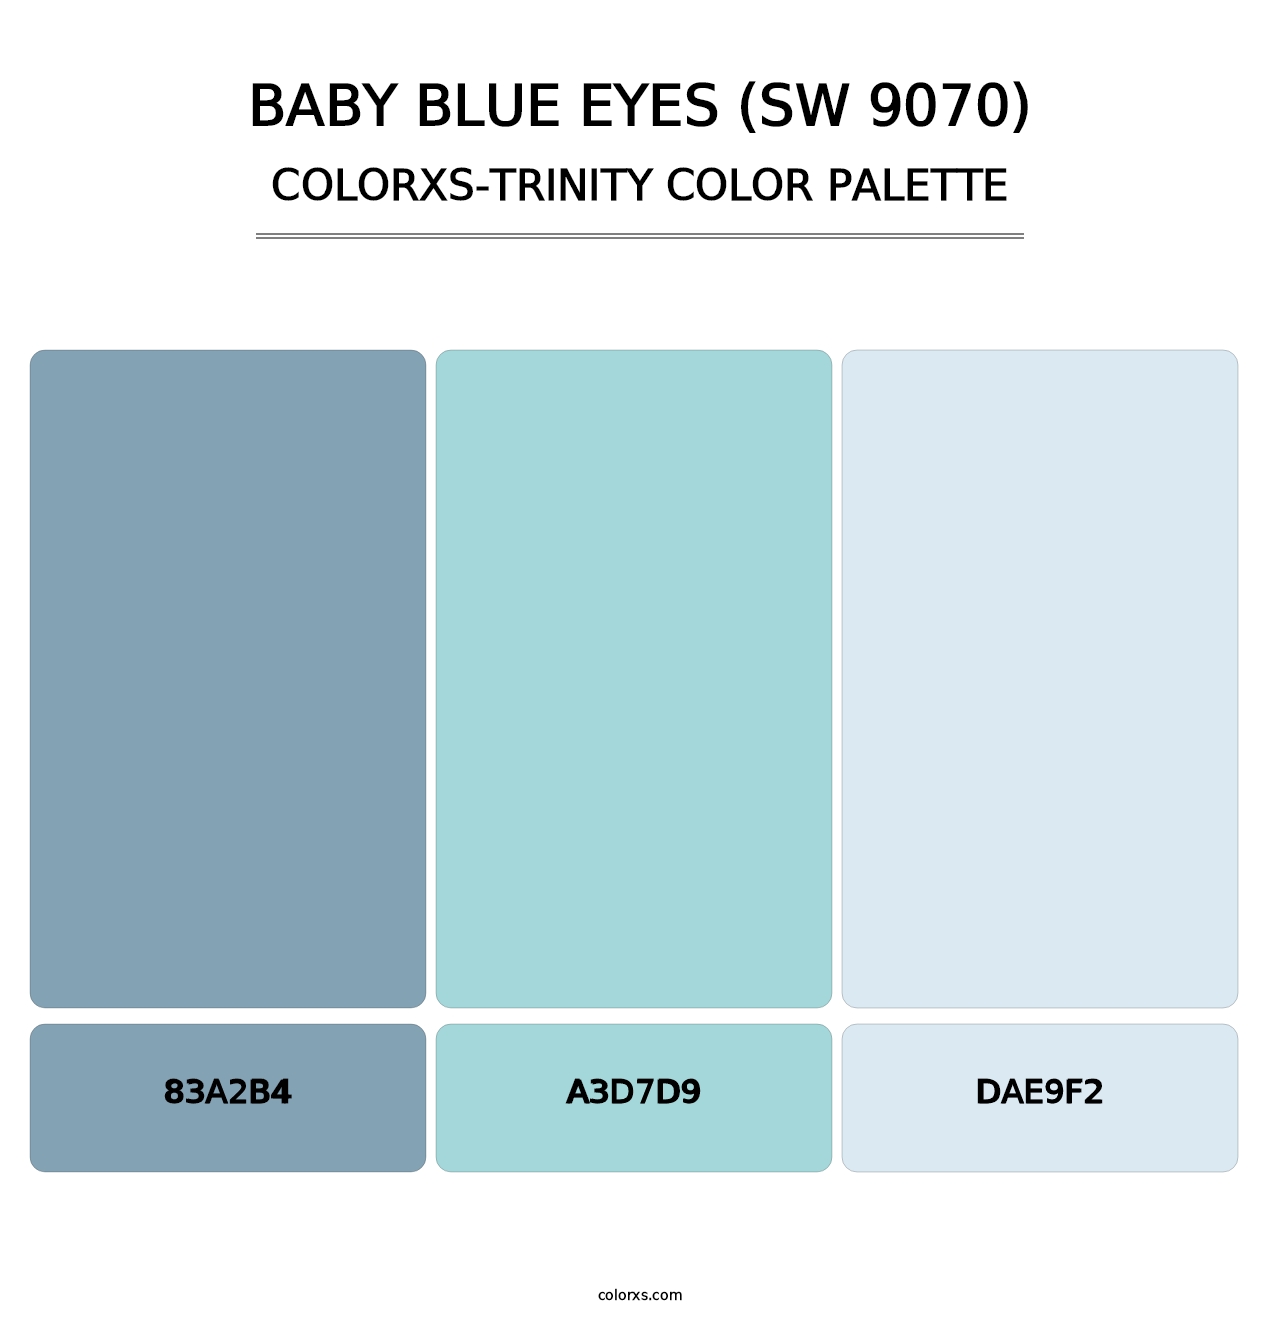 Baby Blue Eyes (SW 9070) - Colorxs Trinity Palette